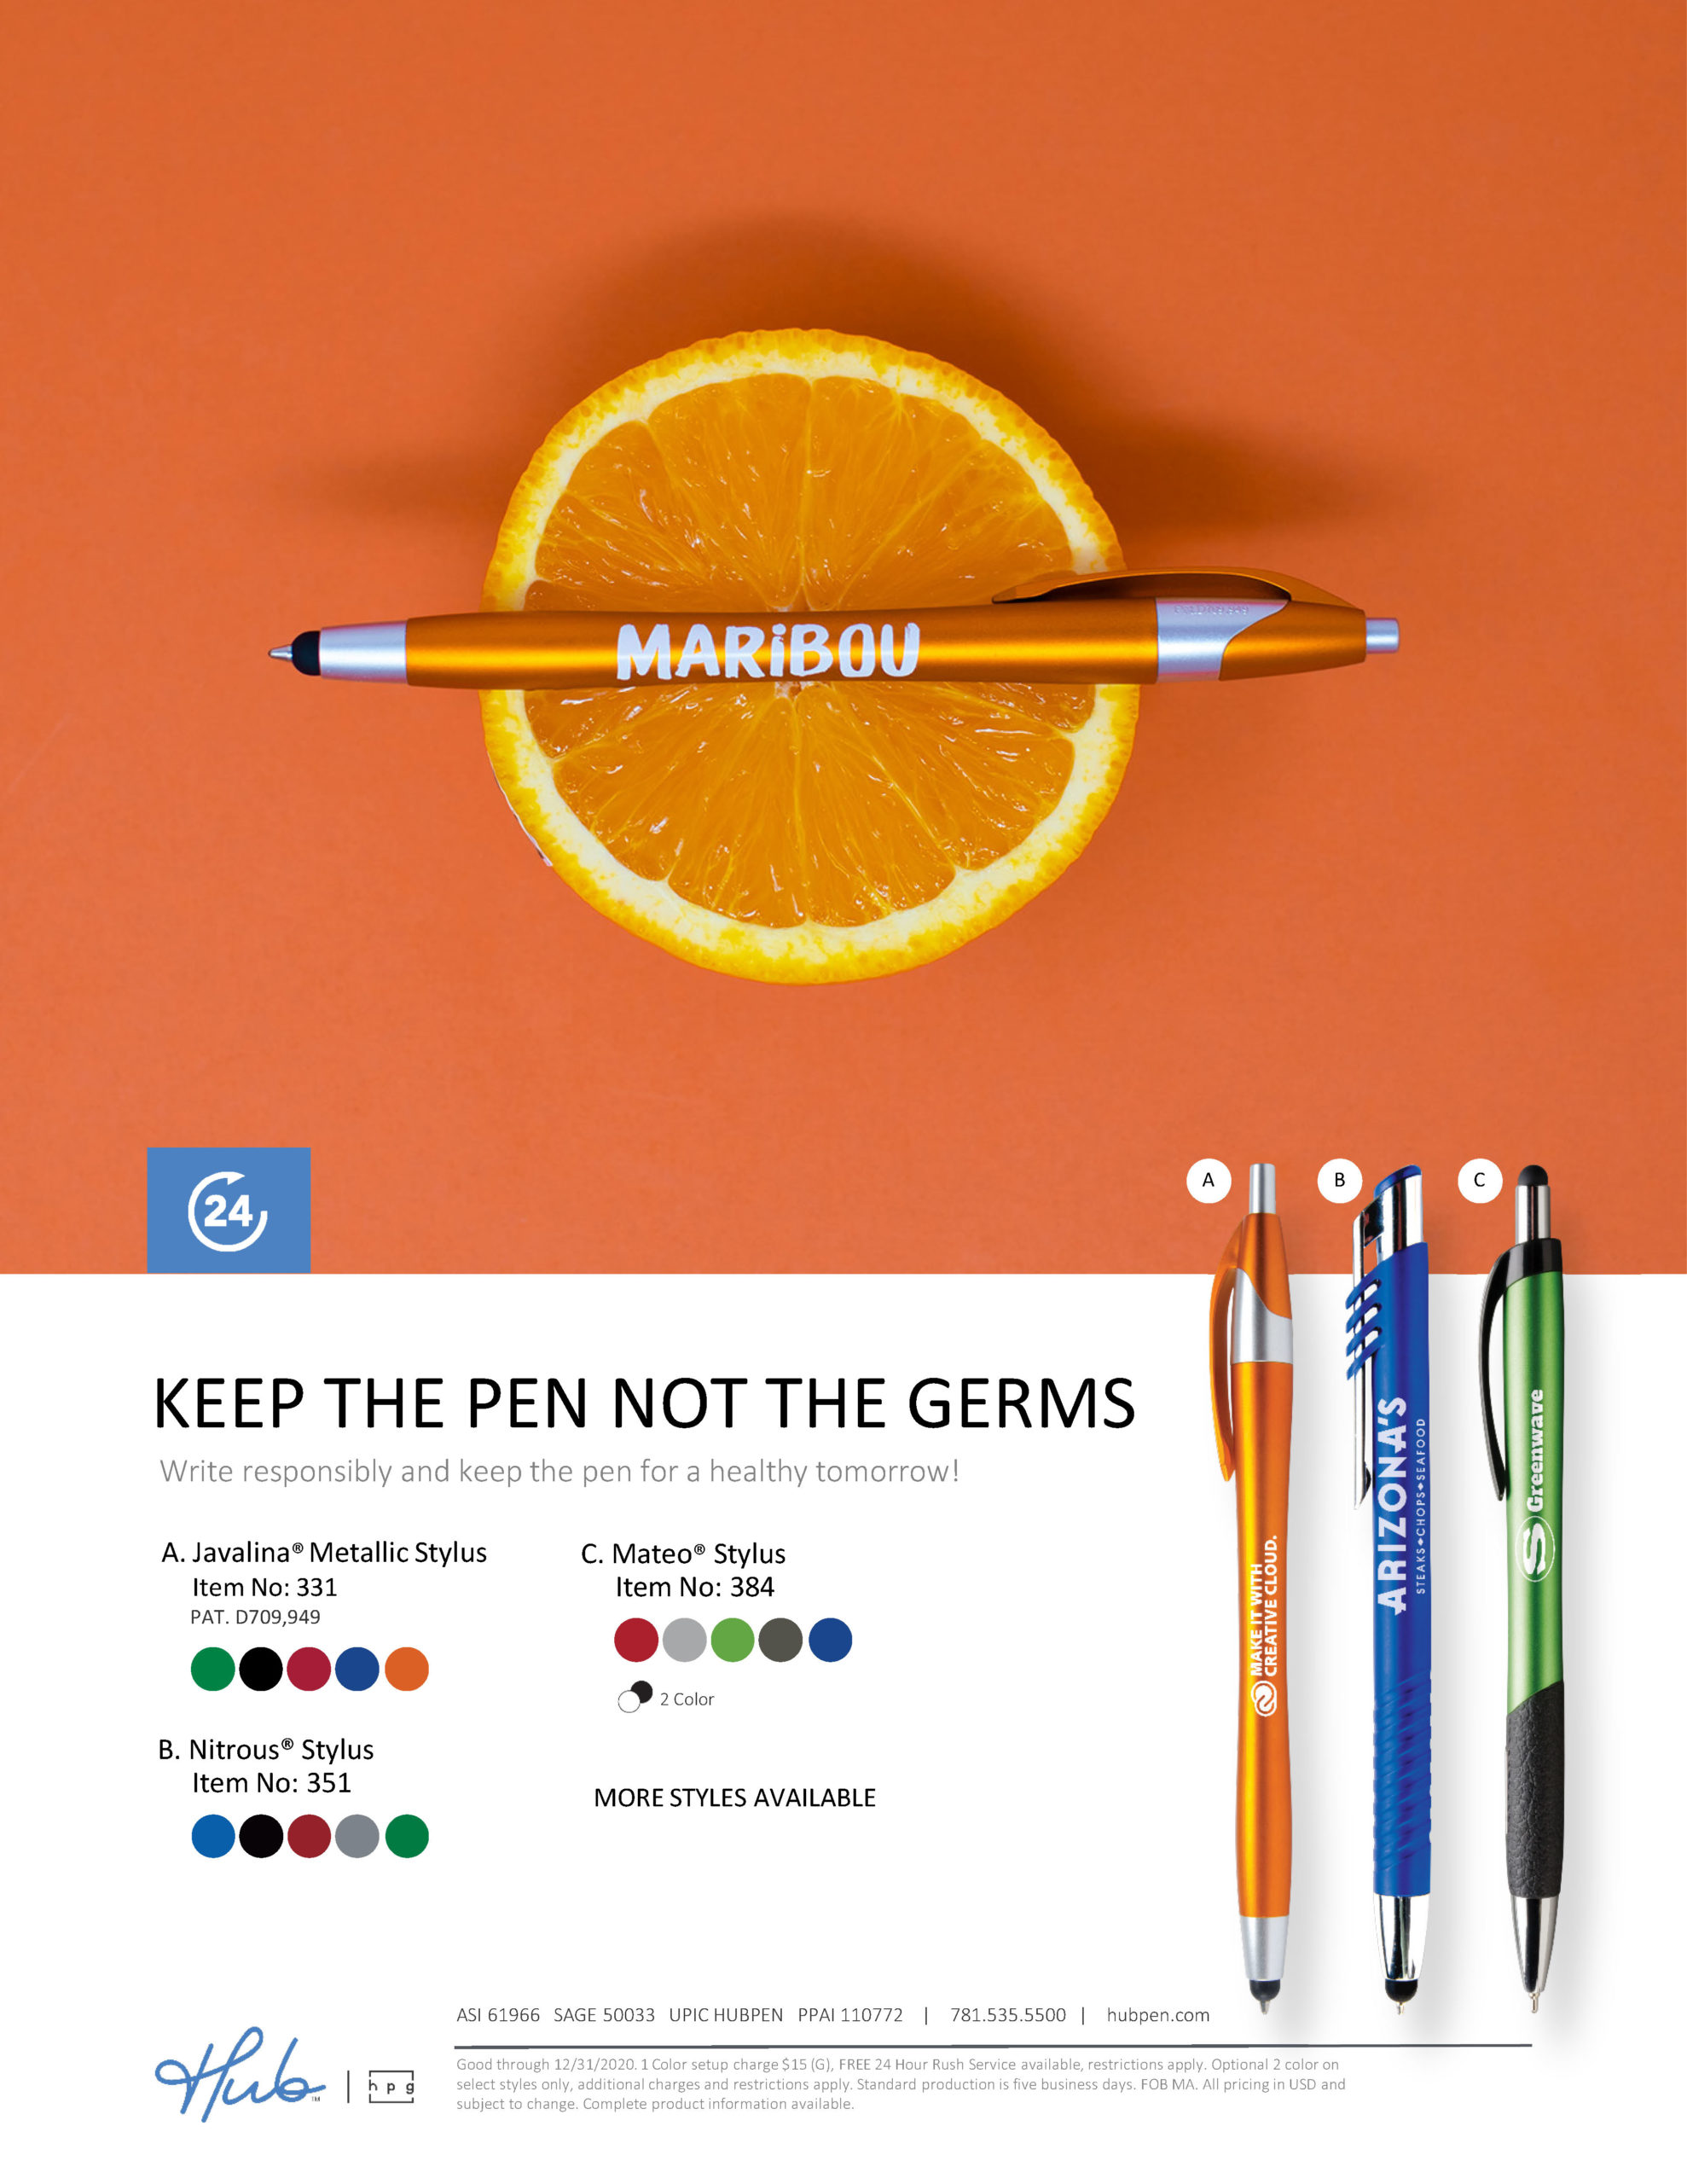 Keep the pen not the germs